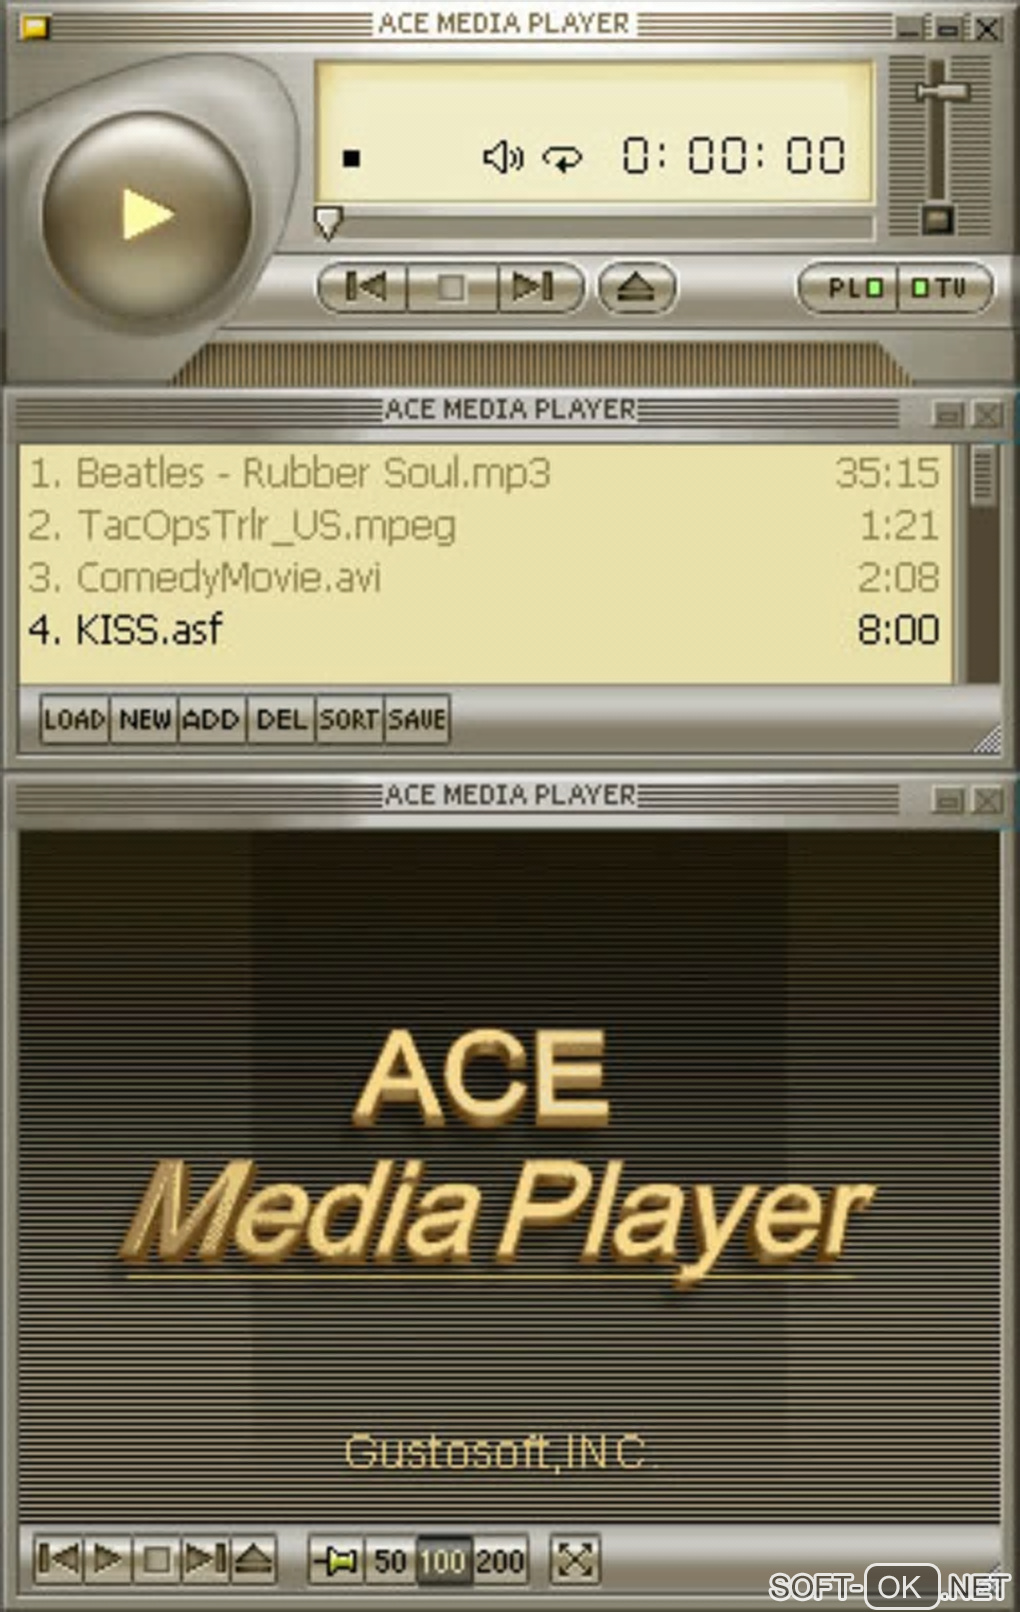 The appearance "Ace Media Player"